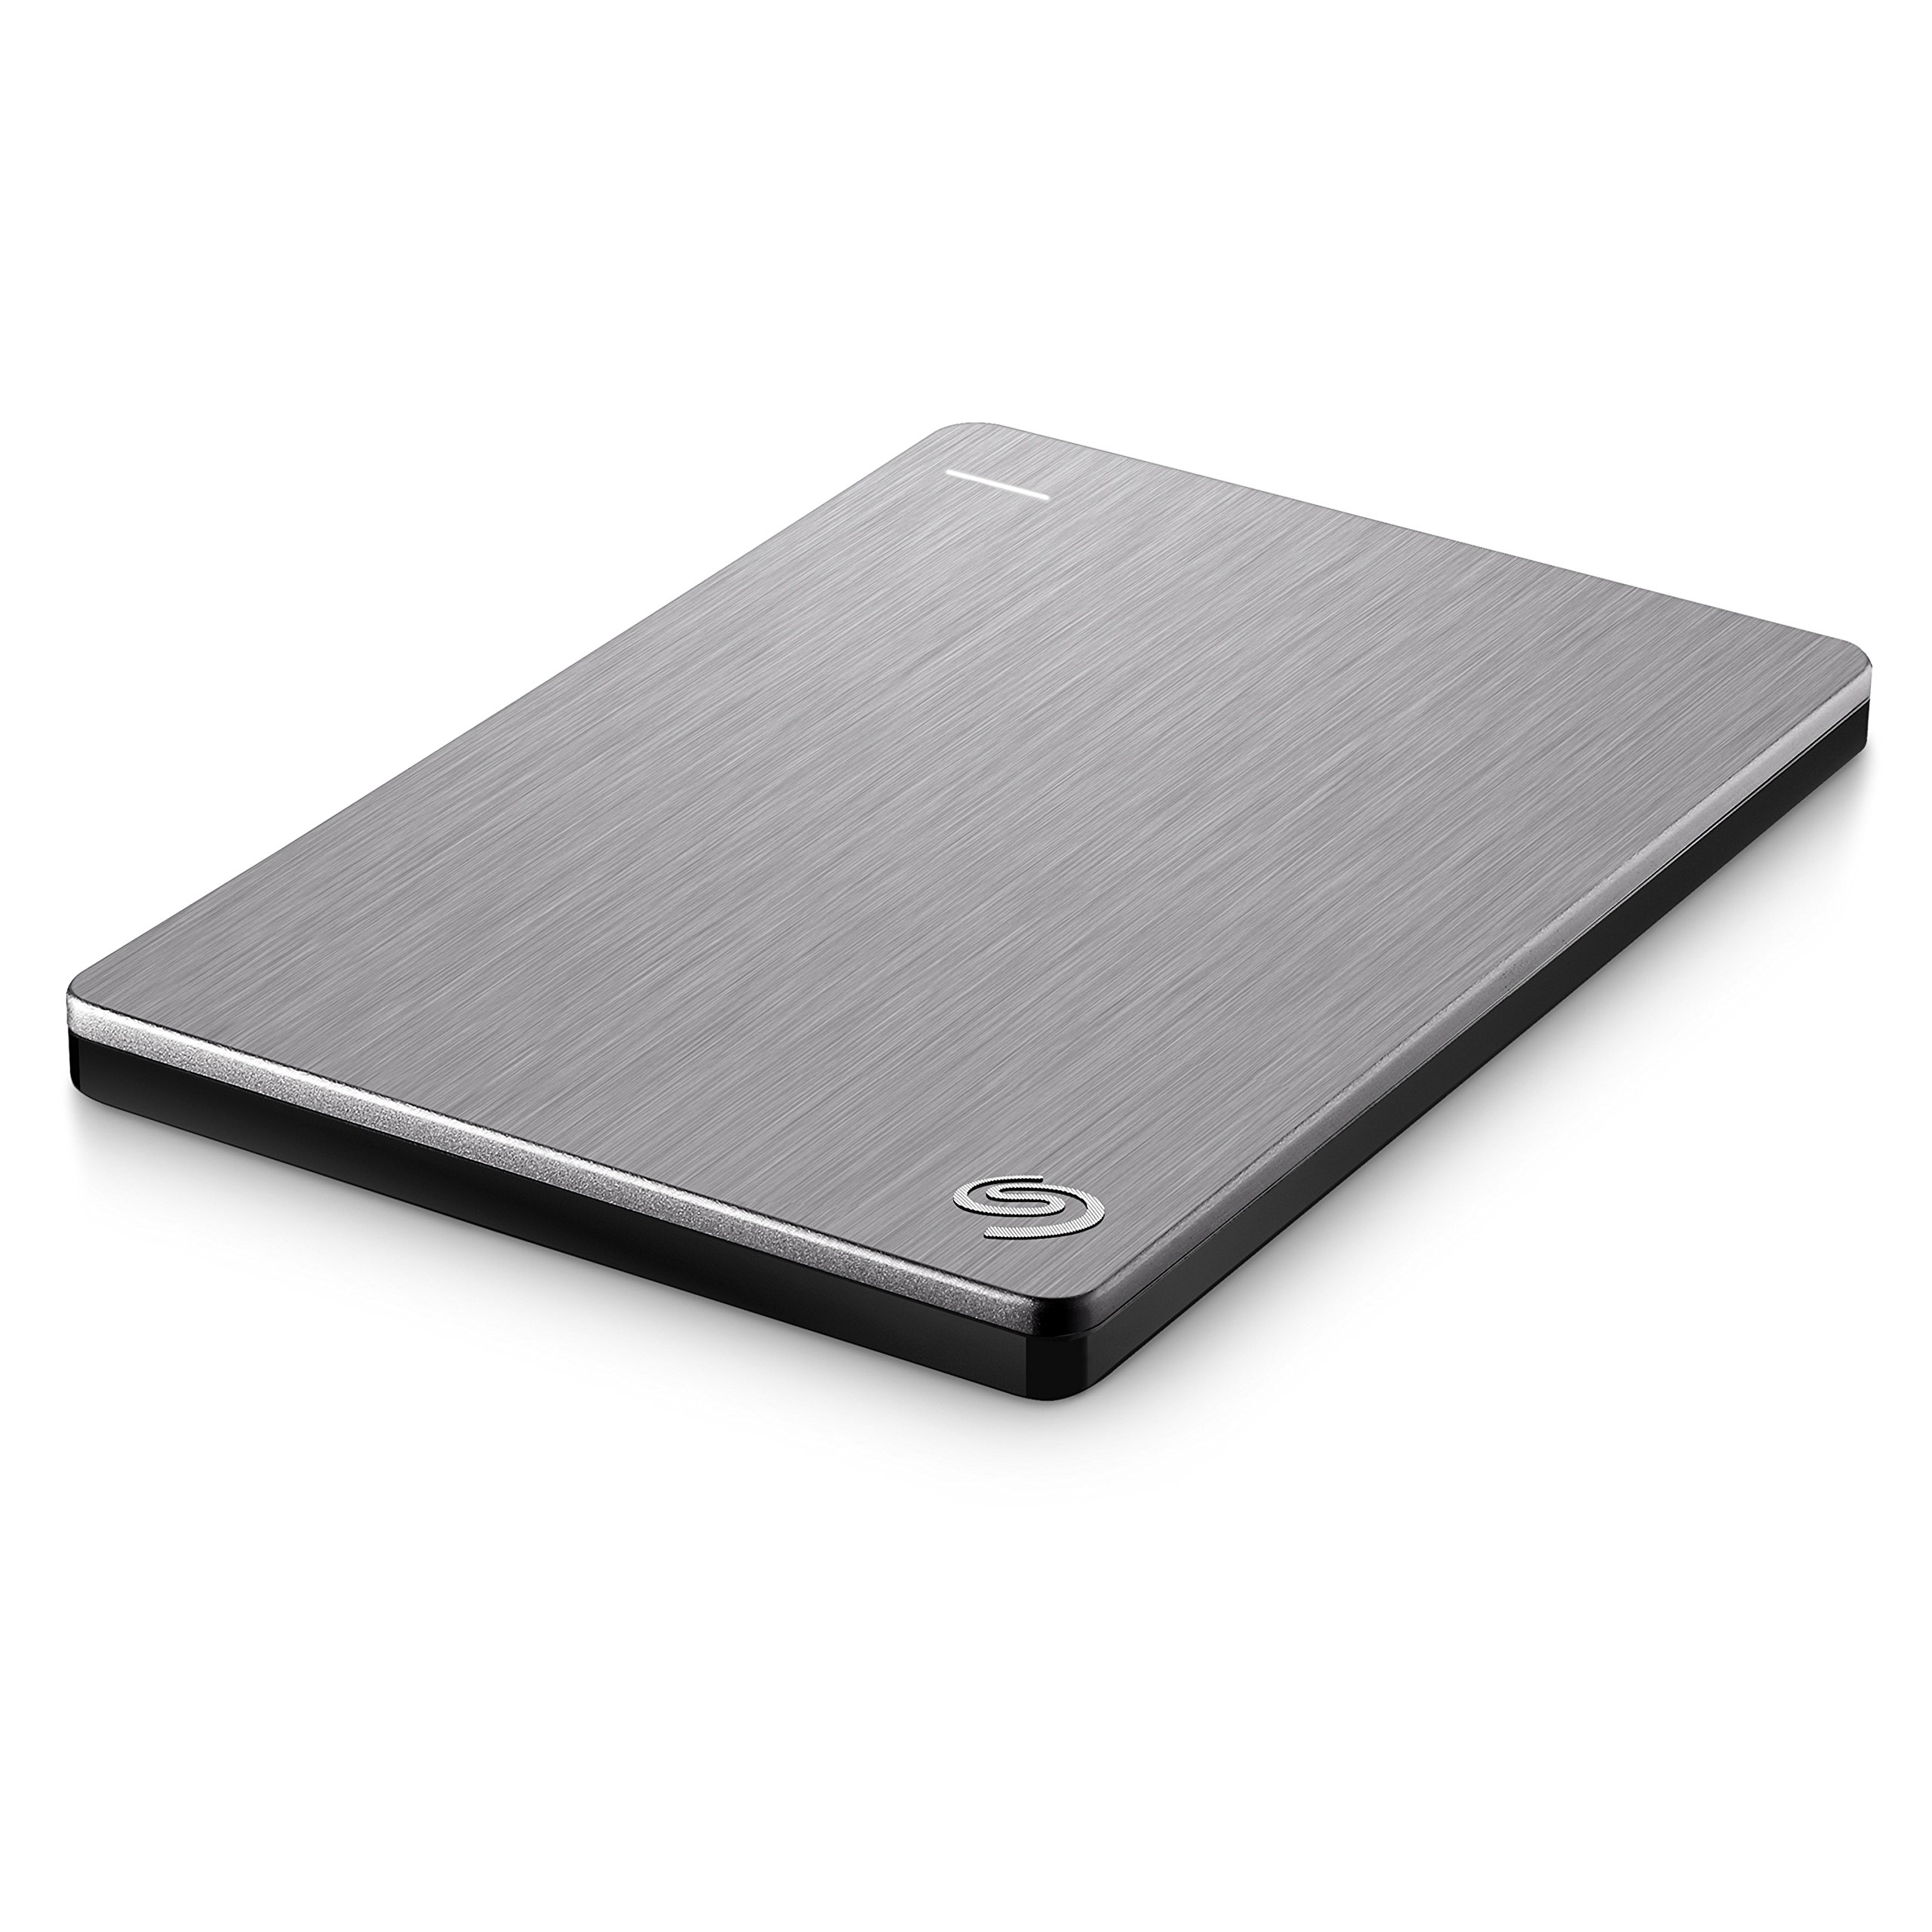 Seagate Backup Plus Slim 2TB External Hard Drive Portable HDD – Silver USB 3.0 for PC Laptop and Mac, 2 Months Adobe CC Photography (STDR2000101)